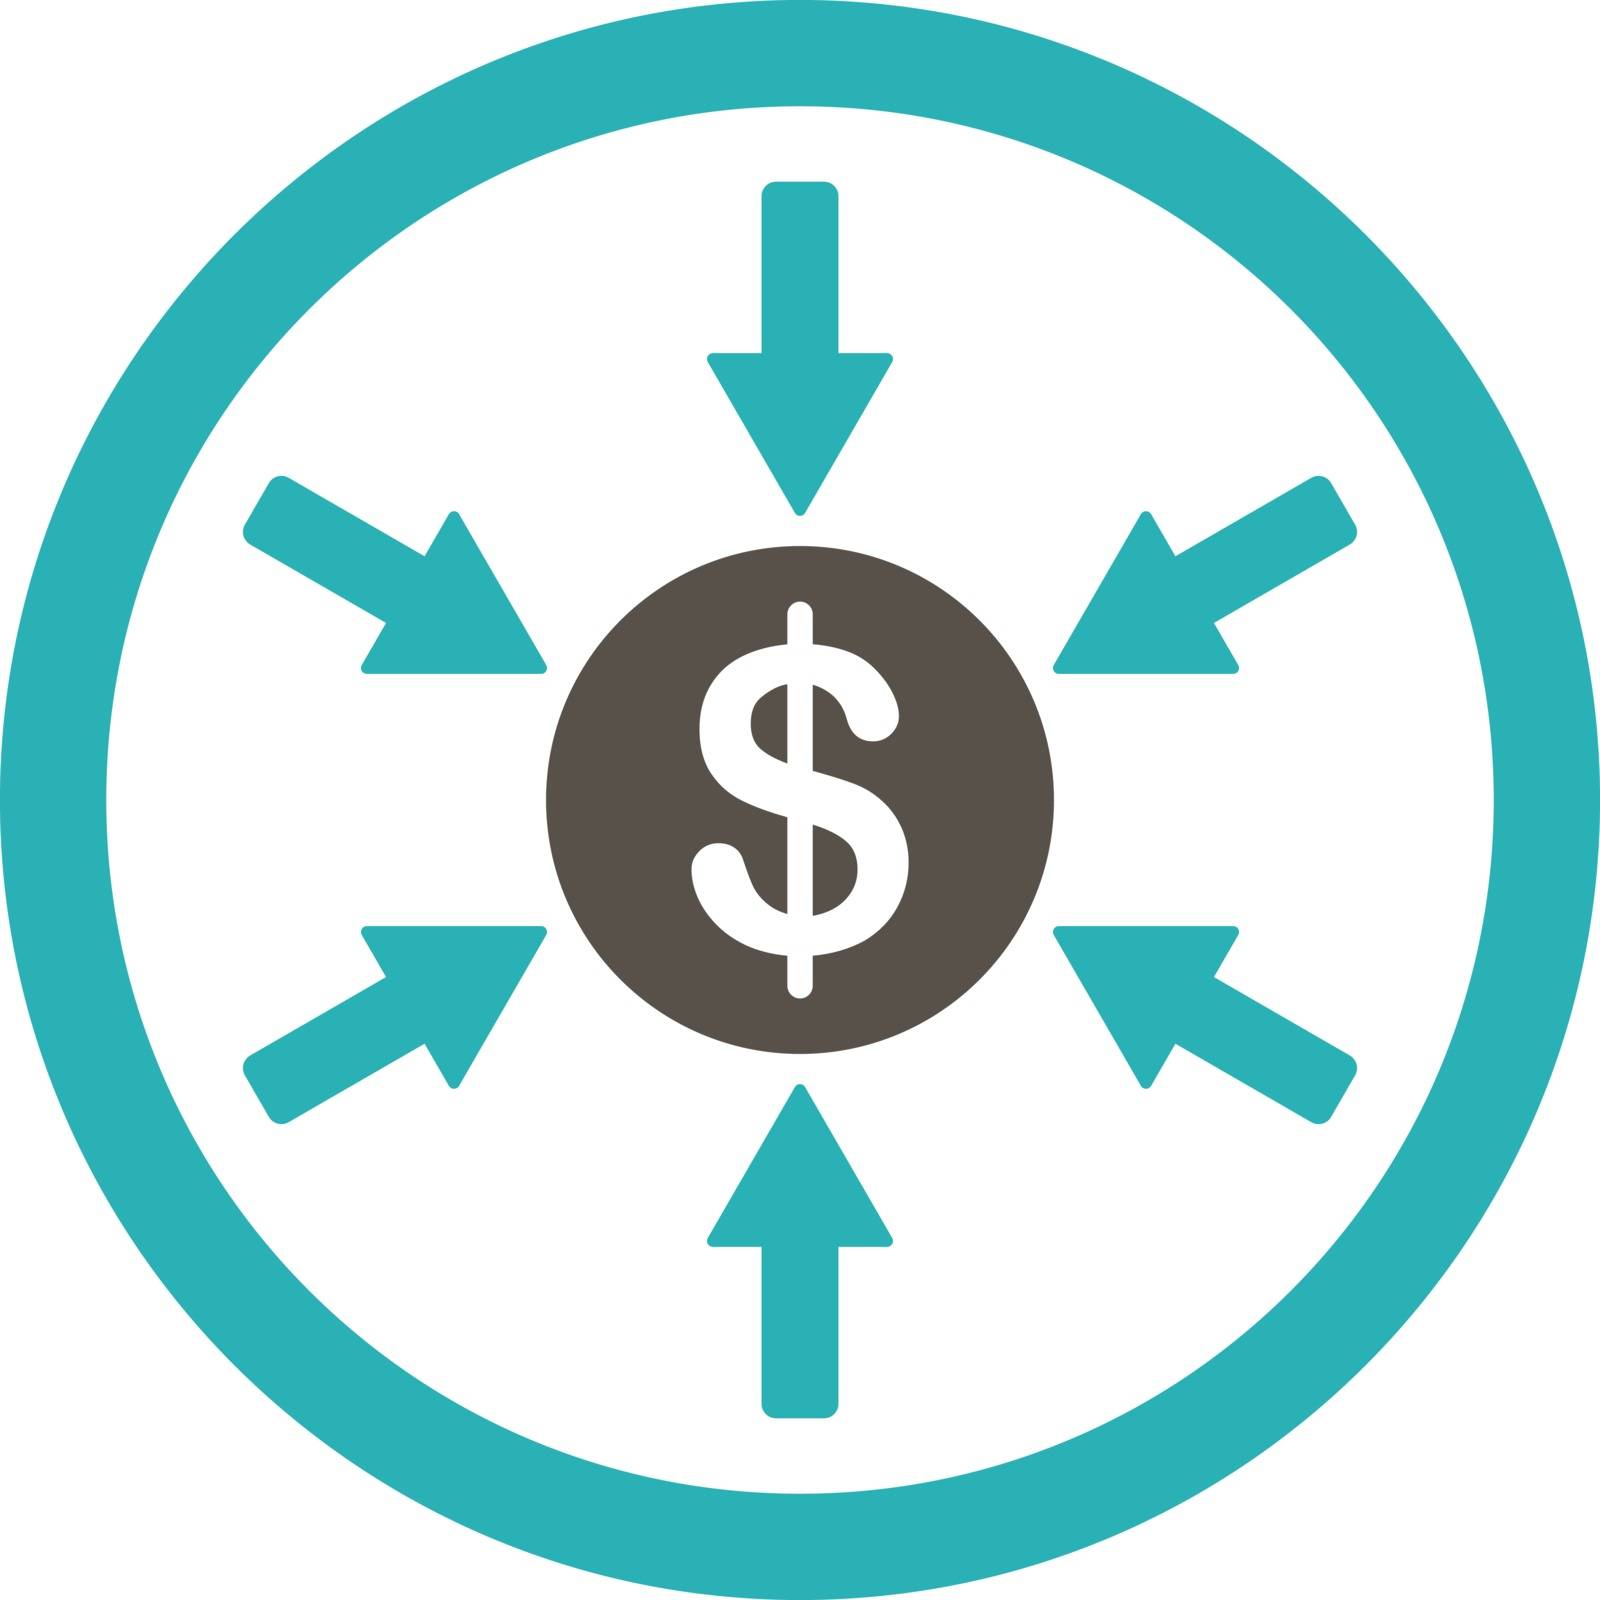 Income vector icon. This flat rounded symbol uses grey and cyan colors and isolated on a white background.